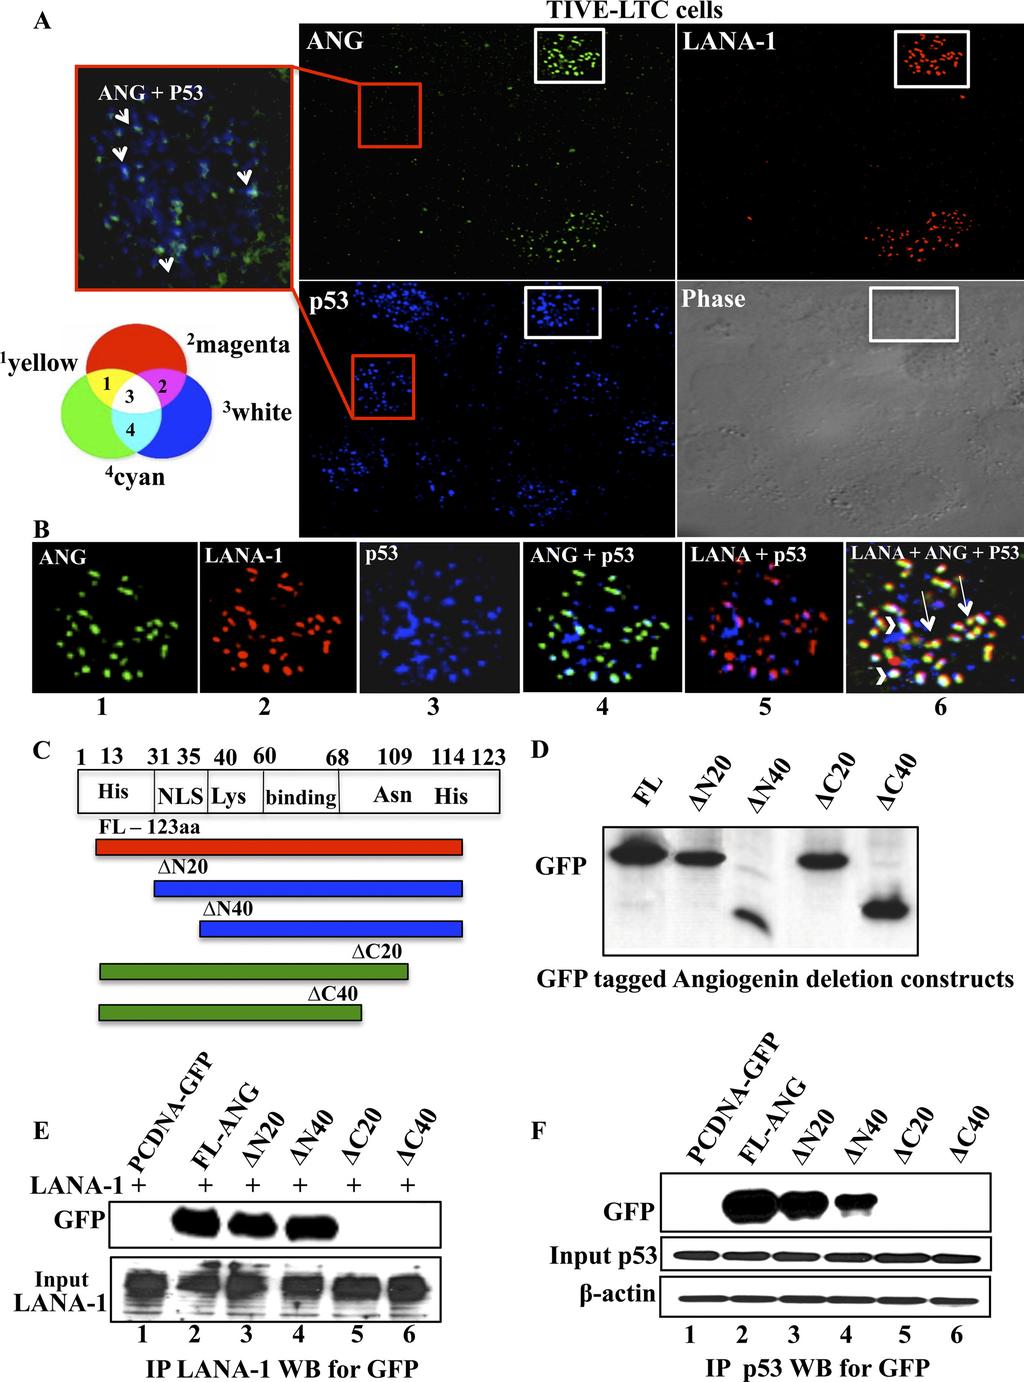 Paudel et al. FIG 5 Immunofluorescence analyses of LANA-1, ANG, and p53 interactions and mapping of ANG domain interacting with LANA-1 and p53.